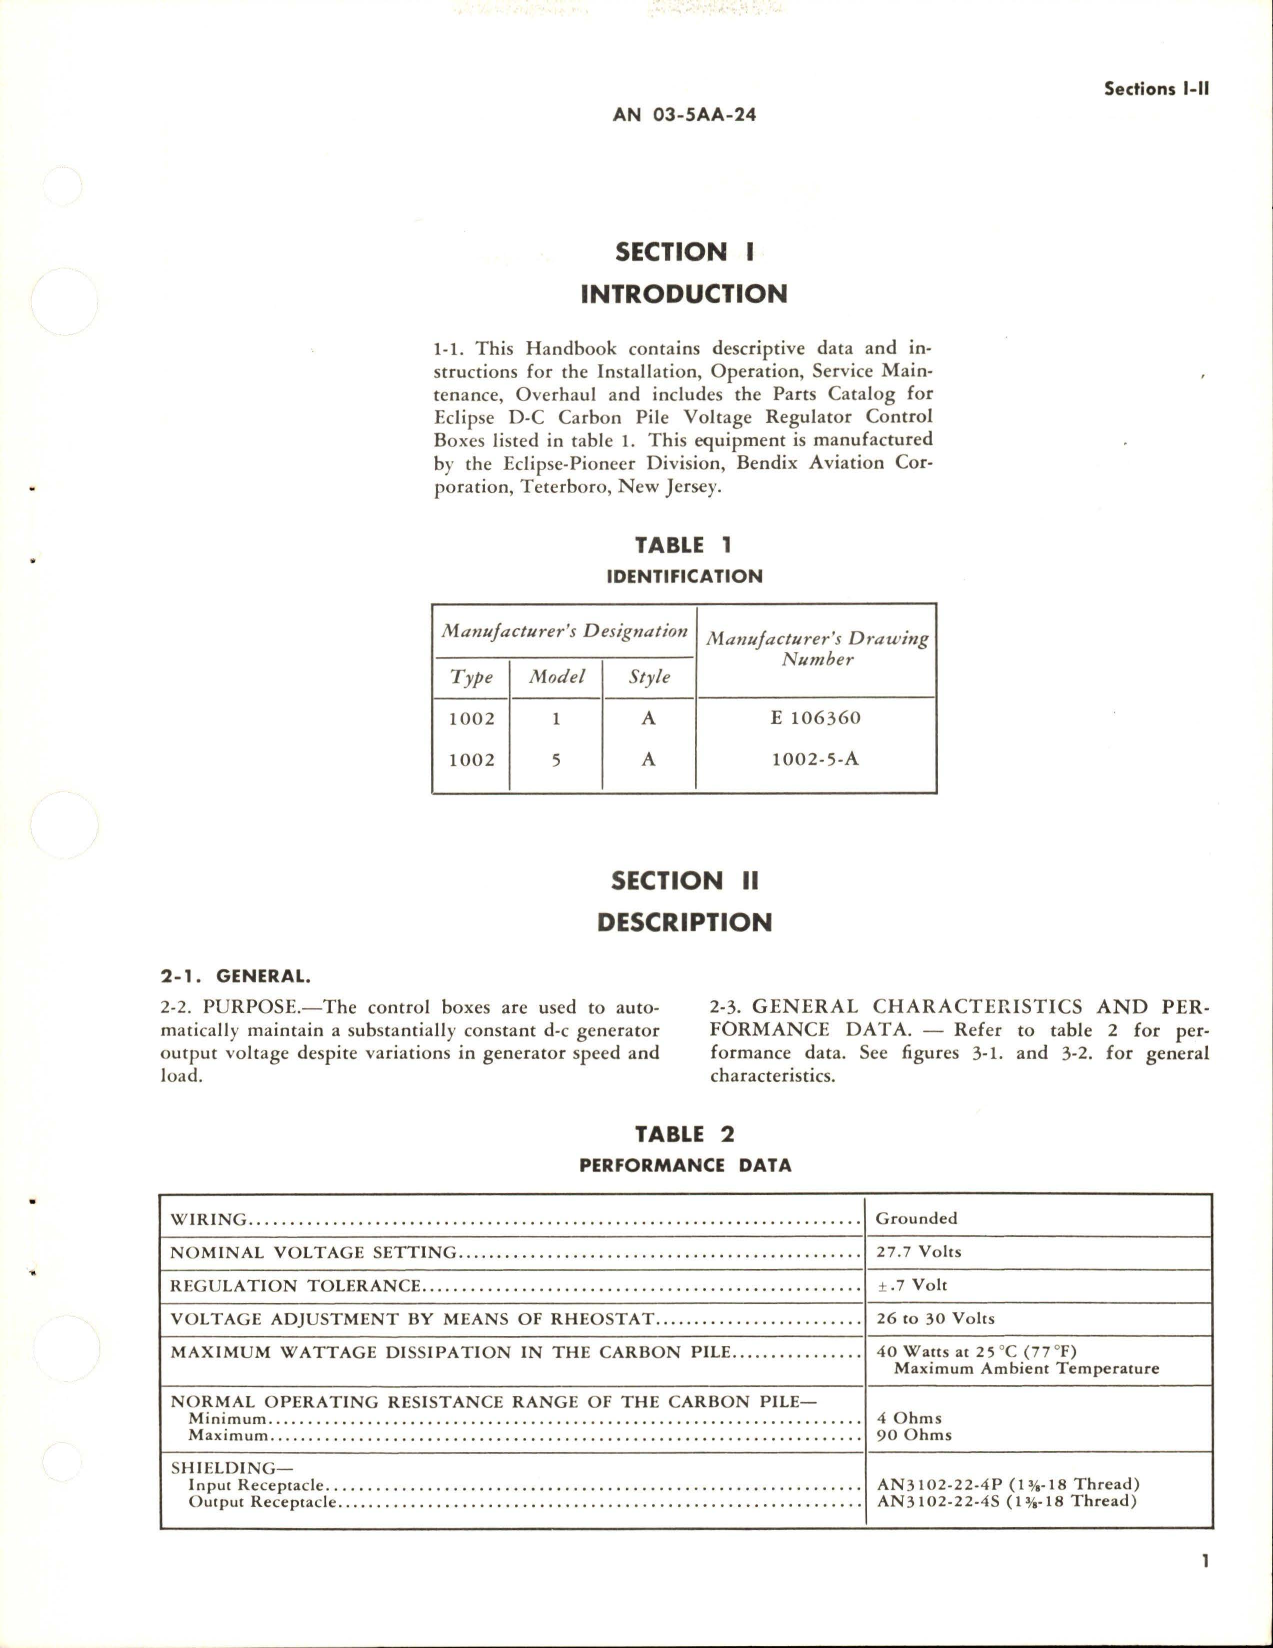 Sample page 5 from AirCorps Library document: Operation, Service and Overhaul Instructions with Parts Catalog for D-C Carbon Pile Voltage Regulator Control Box - Models 1002-1-A and 1002-5-A